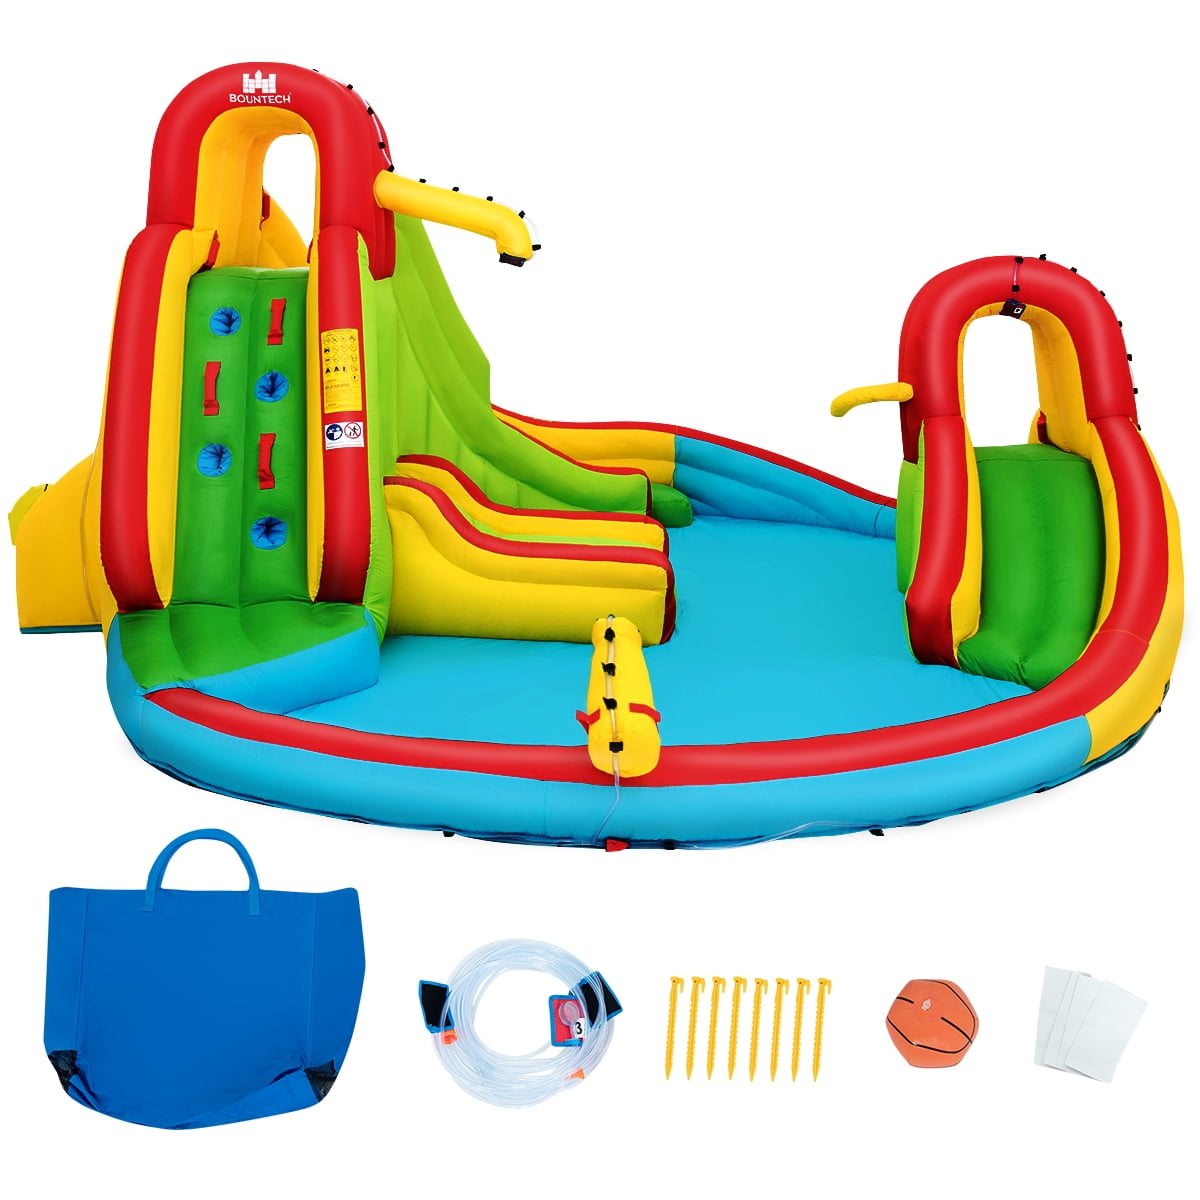 Details about   Kids Inflatable Water Slide Park with Climbing Wall and Pool 